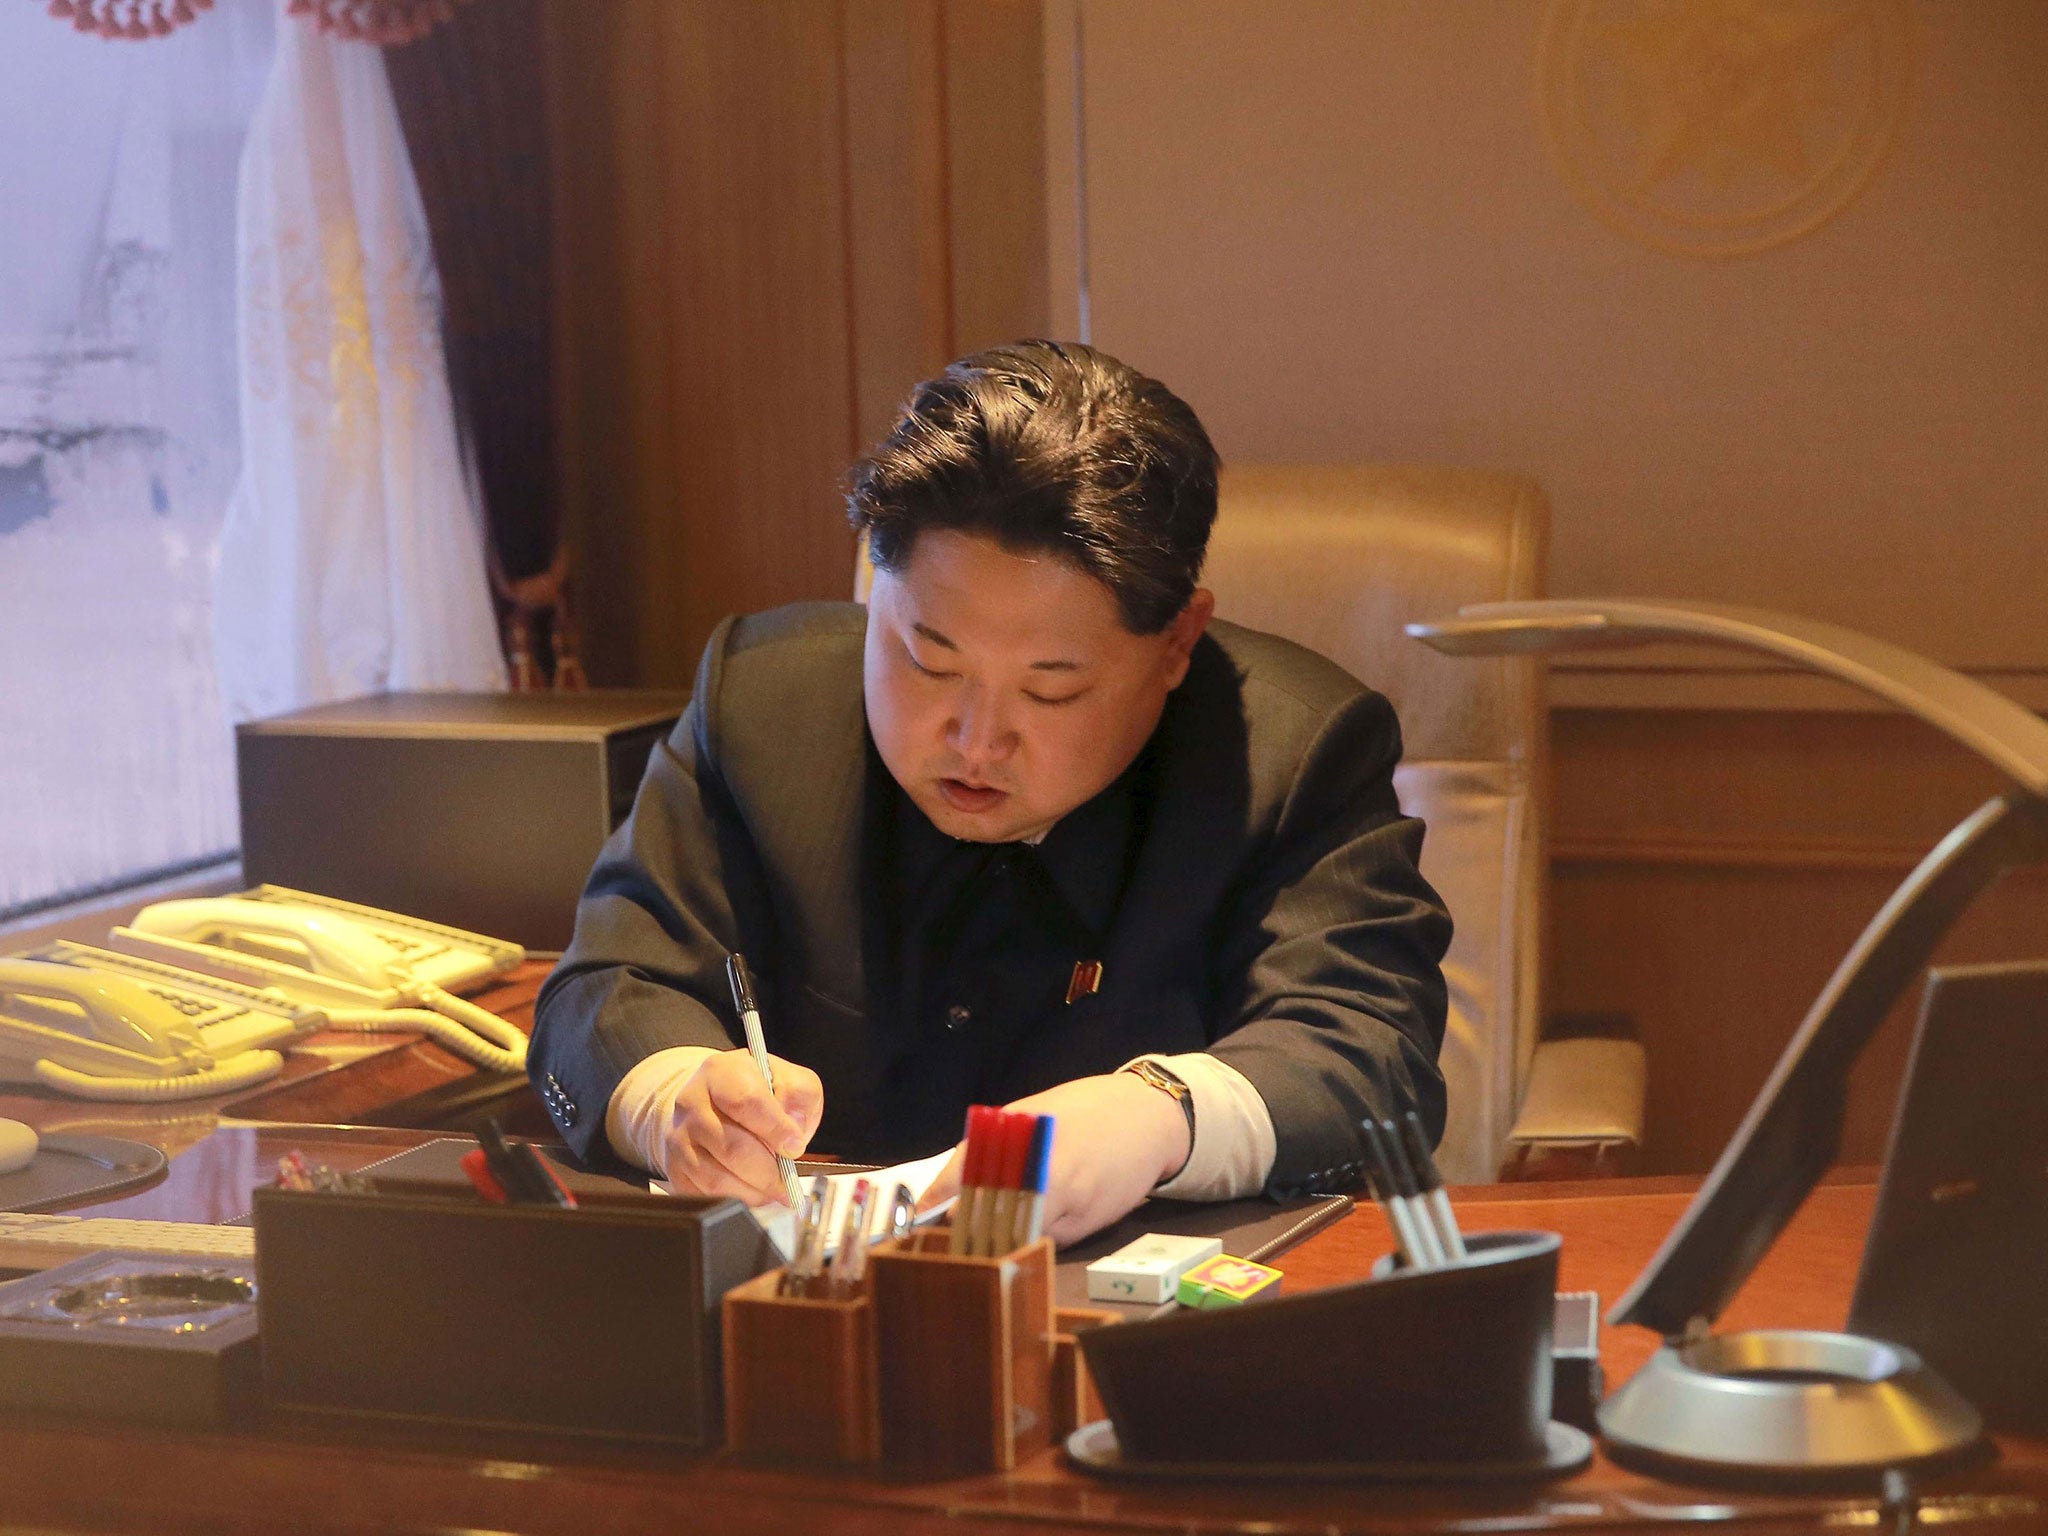 The most recent image of Kim Jong-un released by the North Korean government - purportly showing him signing off on a rocket launch